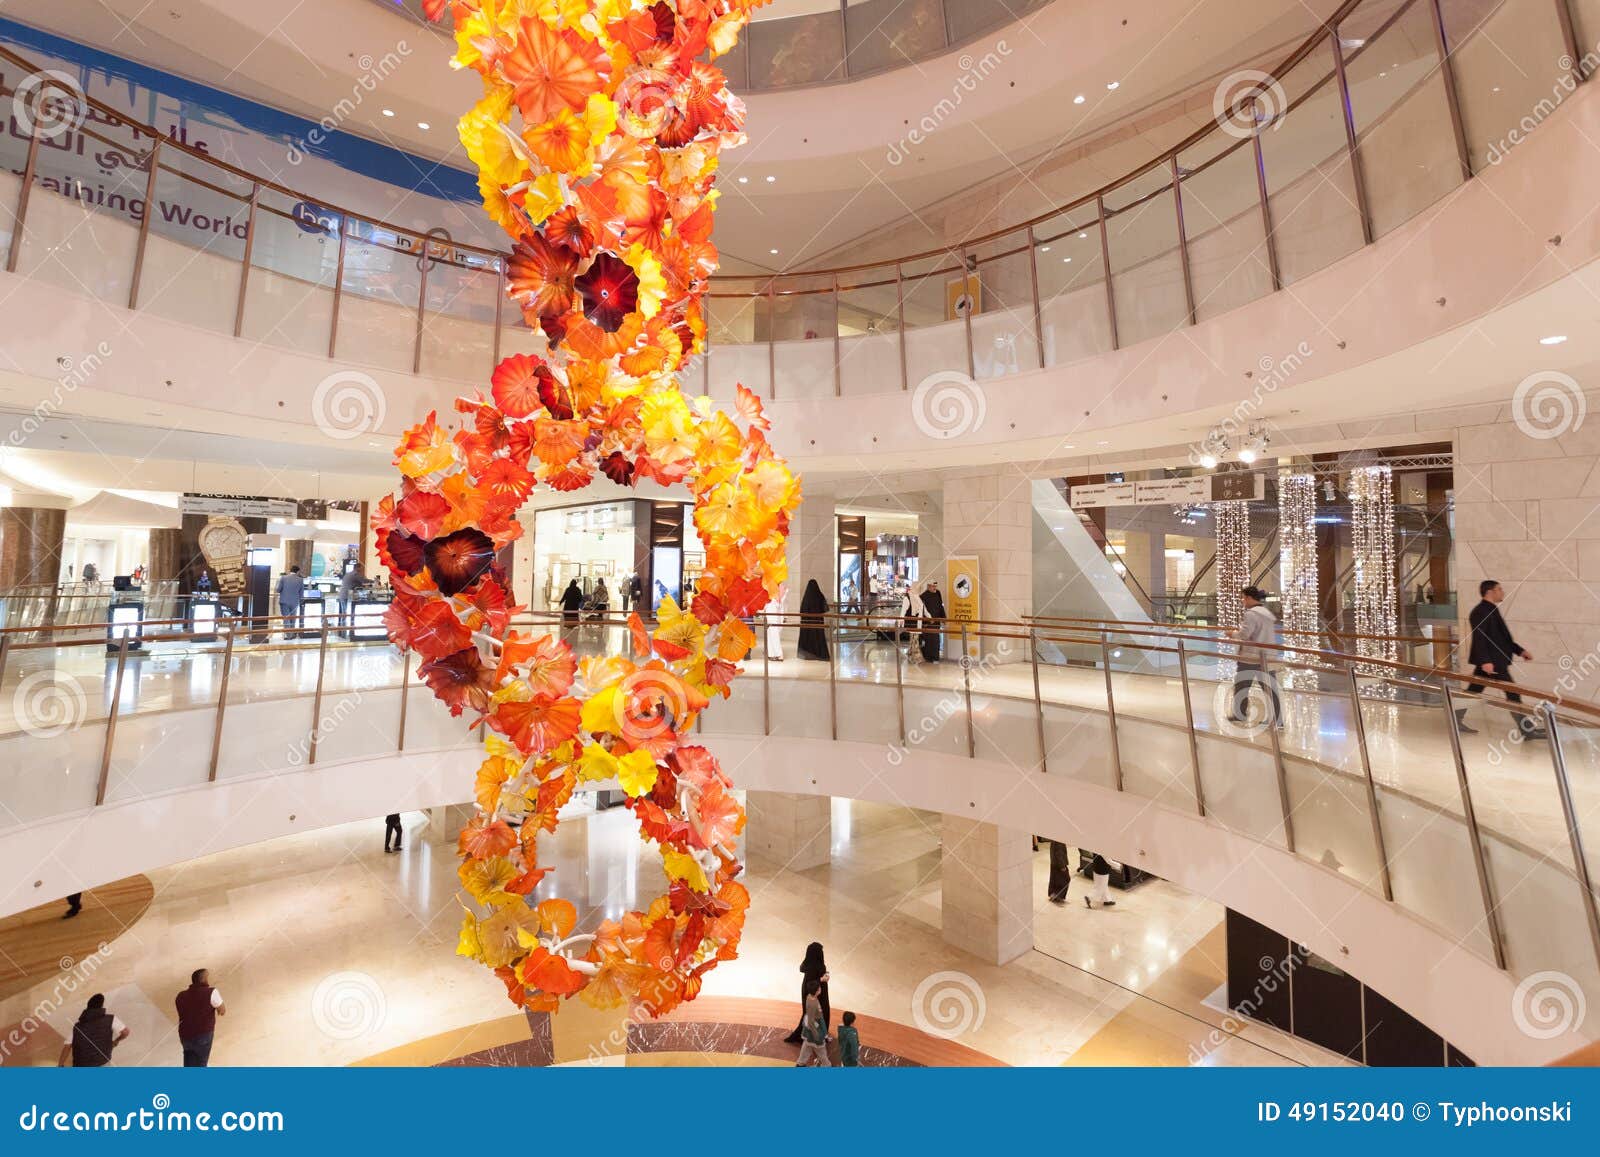  Decoration  Inside Of The 360 Mall In Kuwait  Editorial 